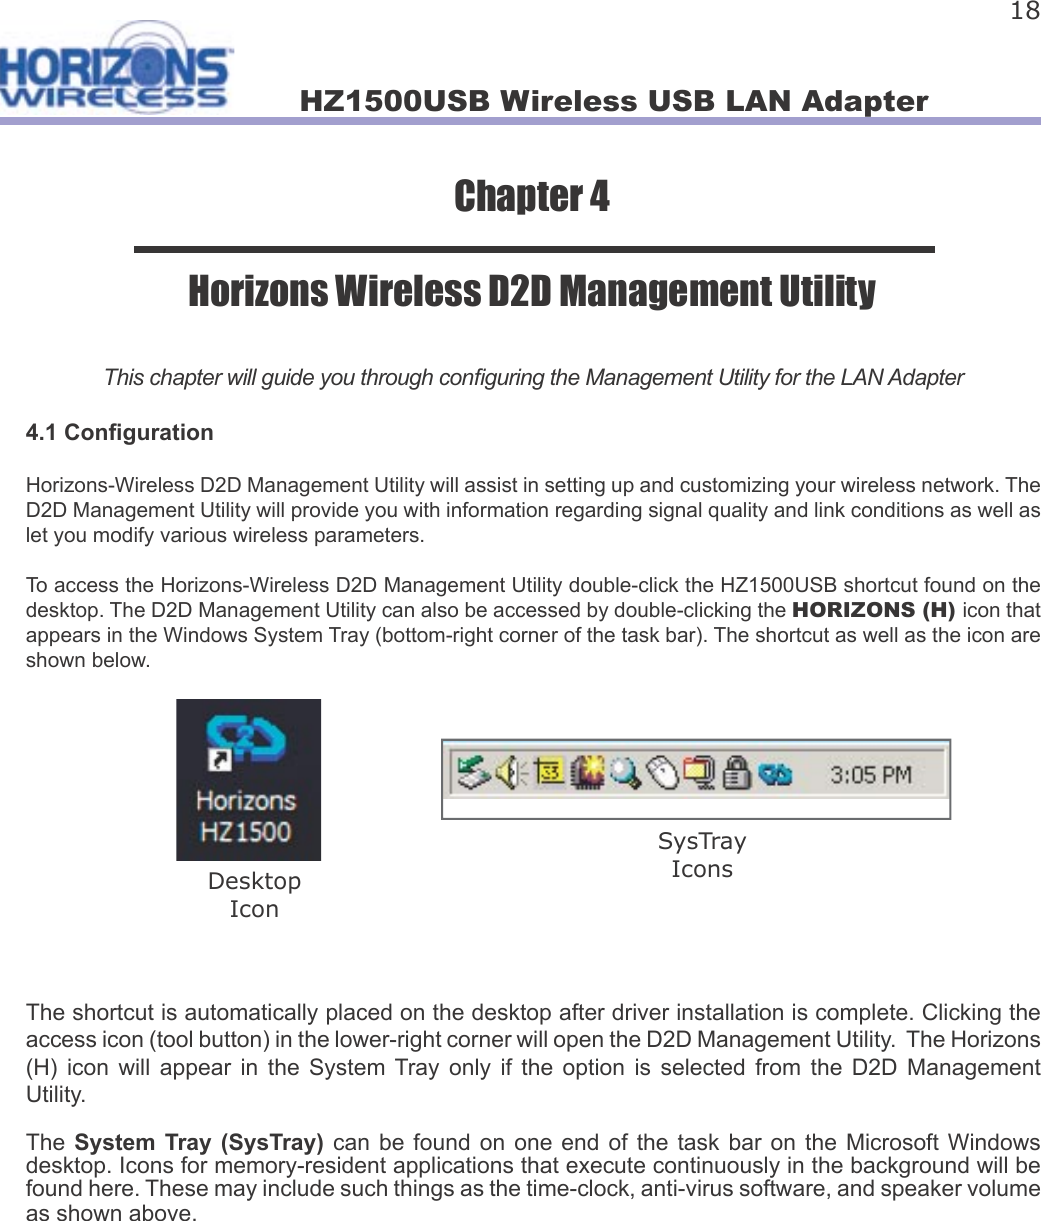 HZ1500USB Wireless USB LAN Adapter 18Chapter 4Horizons Wireless D2D Management UtilityThis chapter will guide you through con guring the Management Utility for the LAN Adapter4.1 Con gurationHorizons-Wireless D2D Management Utility will assist in setting up and customizing your wireless network. The D2D Management Utility will provide you with information regarding signal quality and link conditions as well as let you modify various wireless parameters.To access the Horizons-Wireless D2D Management Utility double-click the HZ1500USB shortcut found on the desktop. The D2D Management Utility can also be accessed by double-clicking the HORIZONS (H) icon that appears in the Windows System Tray (bottom-right corner of the task bar). The shortcut as well as the icon are shown below.The shortcut is automatically placed on the desktop after driver installation is complete. Clicking the access icon (tool button) in the lower-right corner will open the D2D Management Utility.  The Horizons (H)  icon  will  appear  in  the  System  Tray  only  if  the  option  is  selected  from  the  D2D  Management Utility. The System  Tray (SysTray)  can be found on  one  end of the task  bar  on  the Microsoft Windows desktop. Icons for memory-resident applications that execute continuously in the background will be found here. These may include such things as the time-clock, anti-virus software, and speaker volume as shown above.    DesktopIconSysTrayIcons